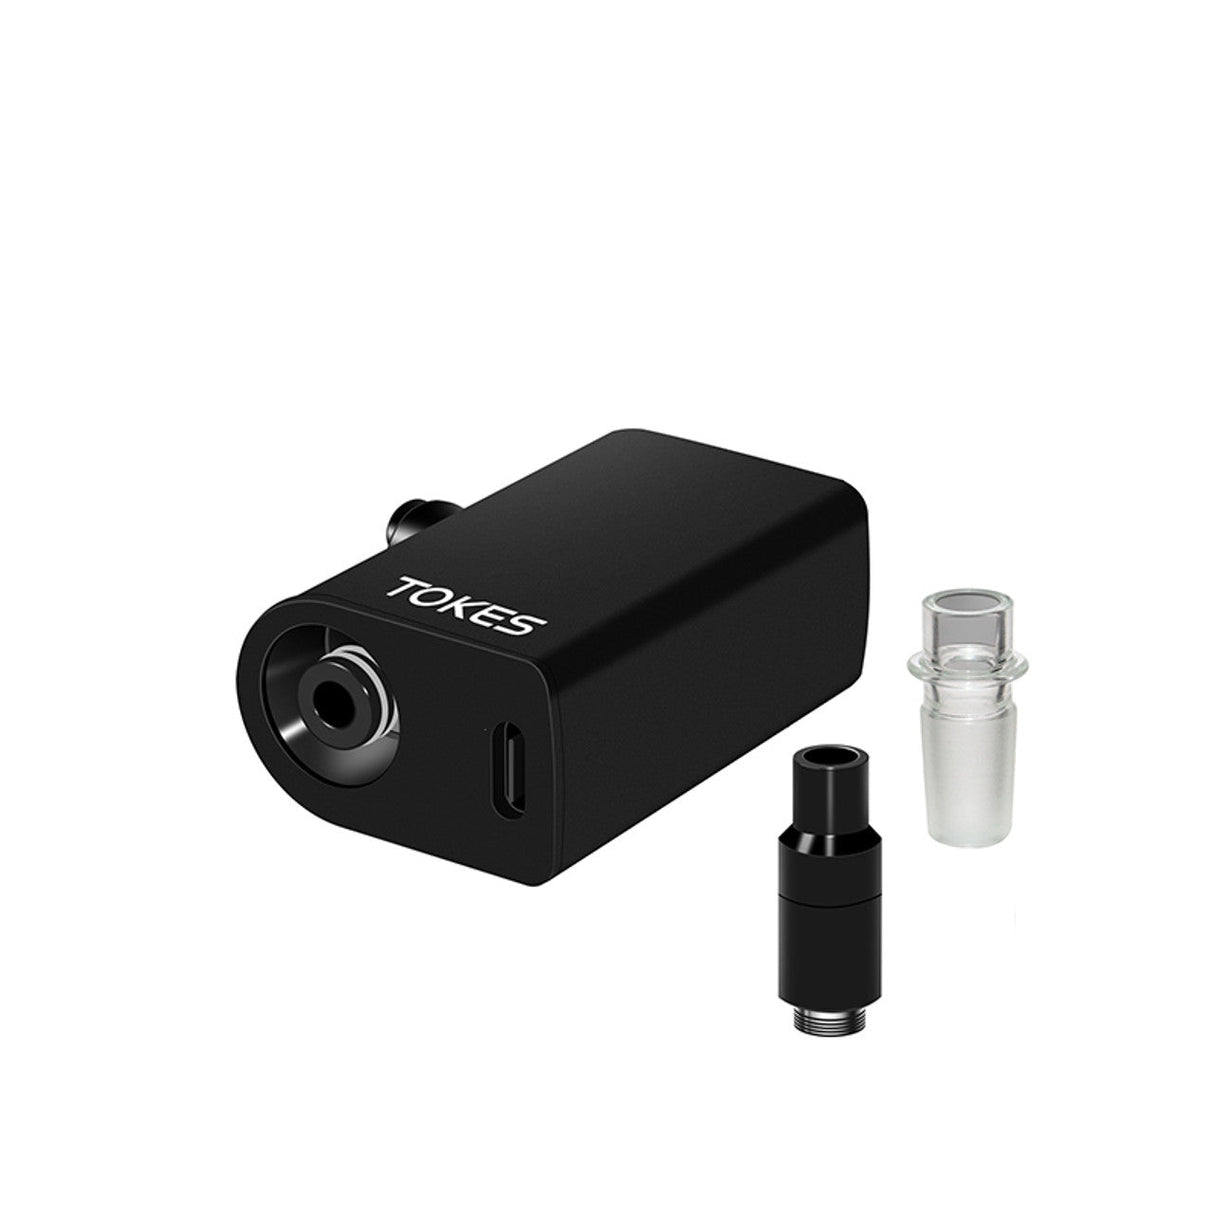 SOC Tokes black dual-use wax vaporizer with 14mm male adapter and 650mAh battery, portable design